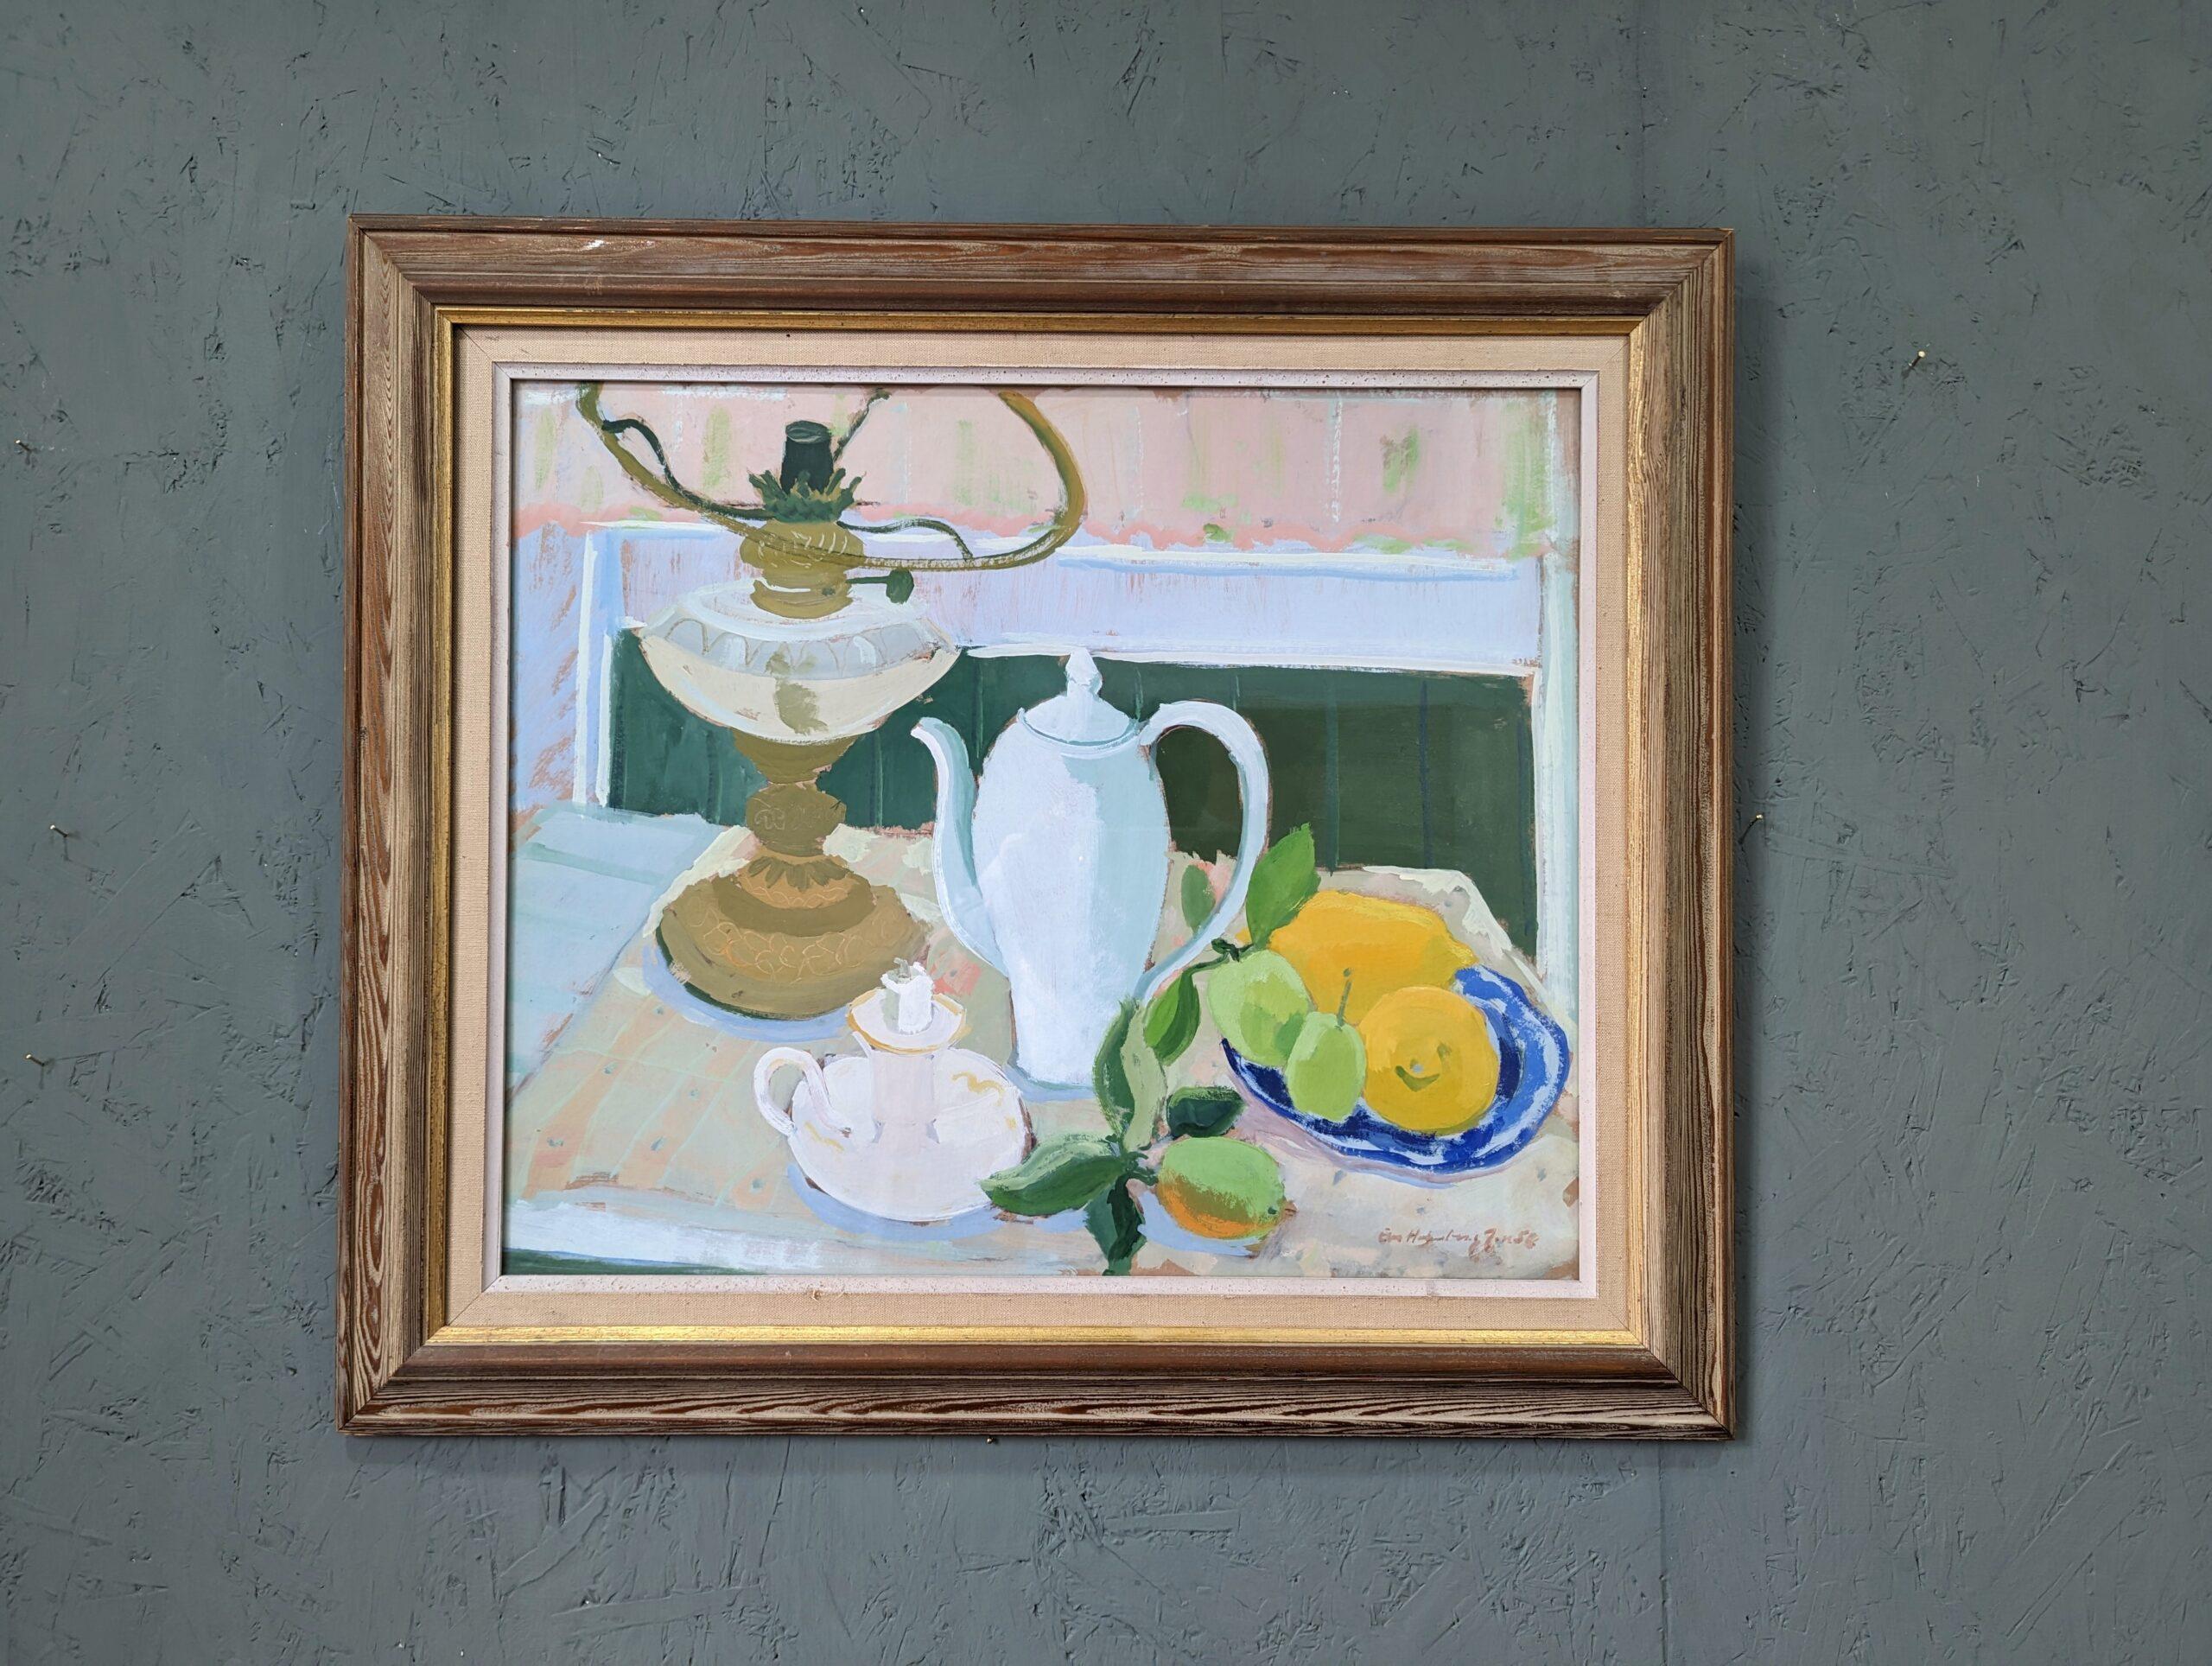 Vintage Mid-Century Swedish Framed Still Life Oil Painting - Teapot & Fruit 1958 - Gray Still-Life Painting by Unknown